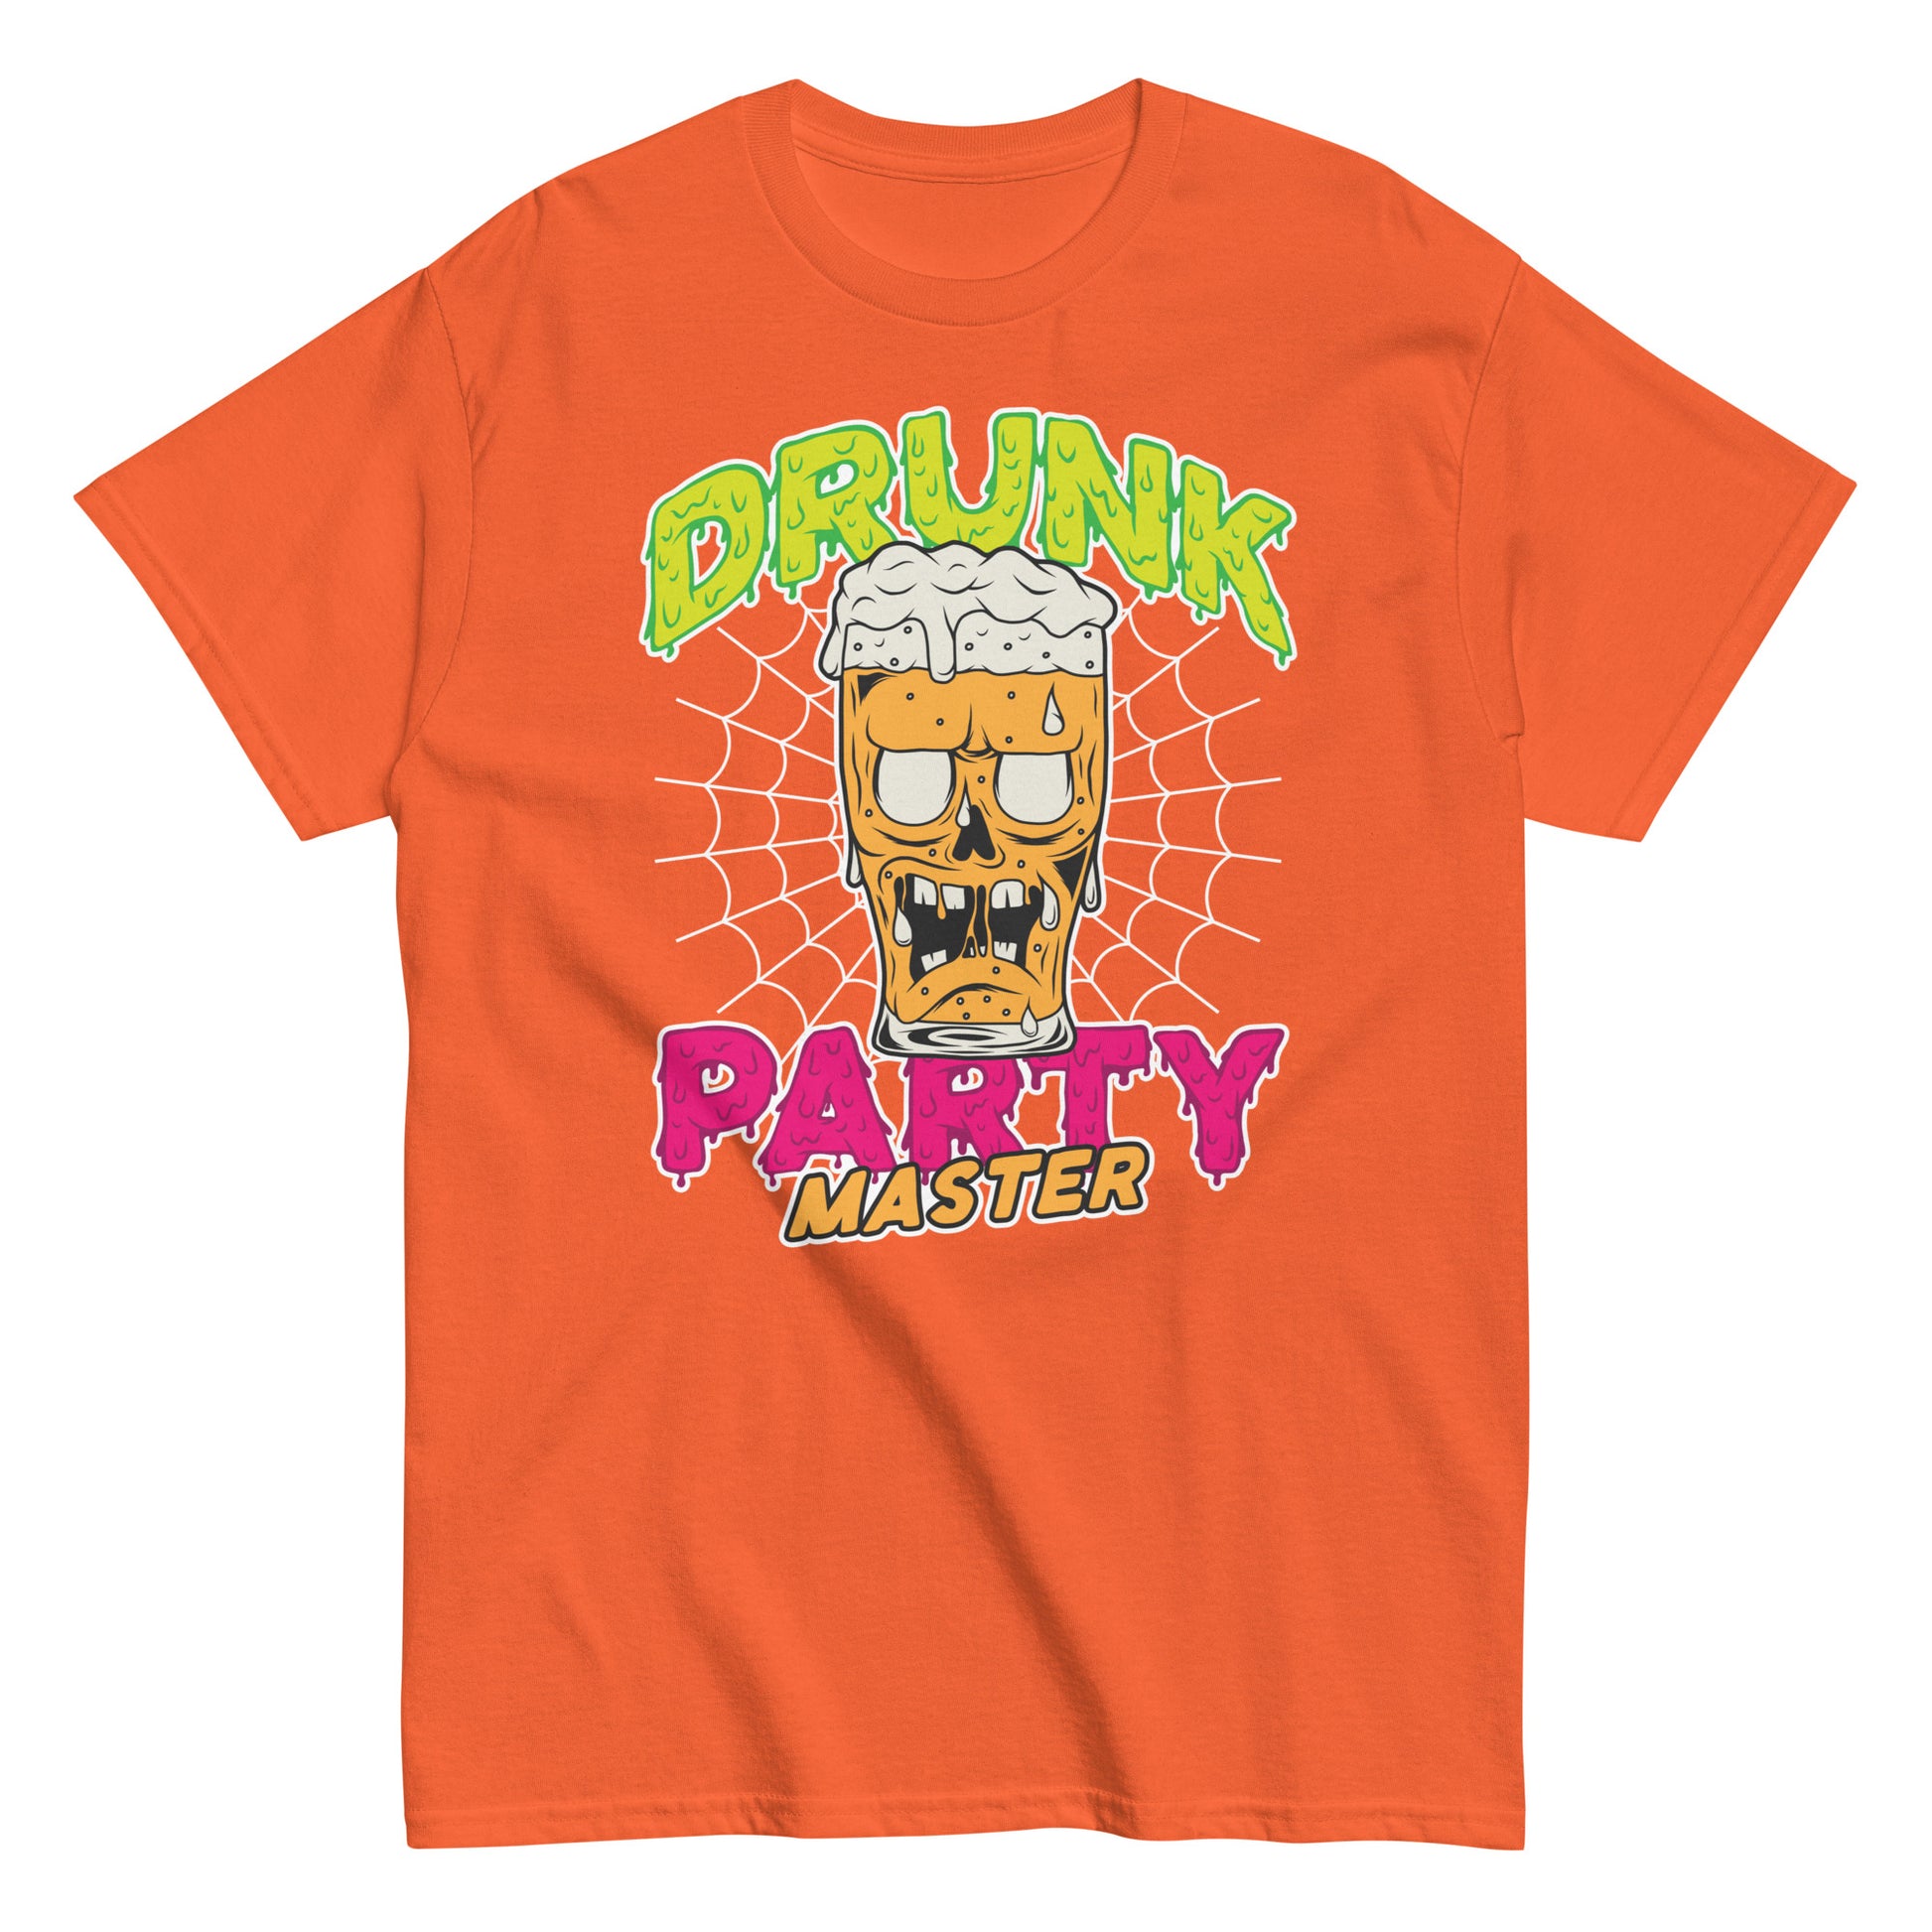 Party Ready Vibes,Drunk Party Master Soft Style Shirt